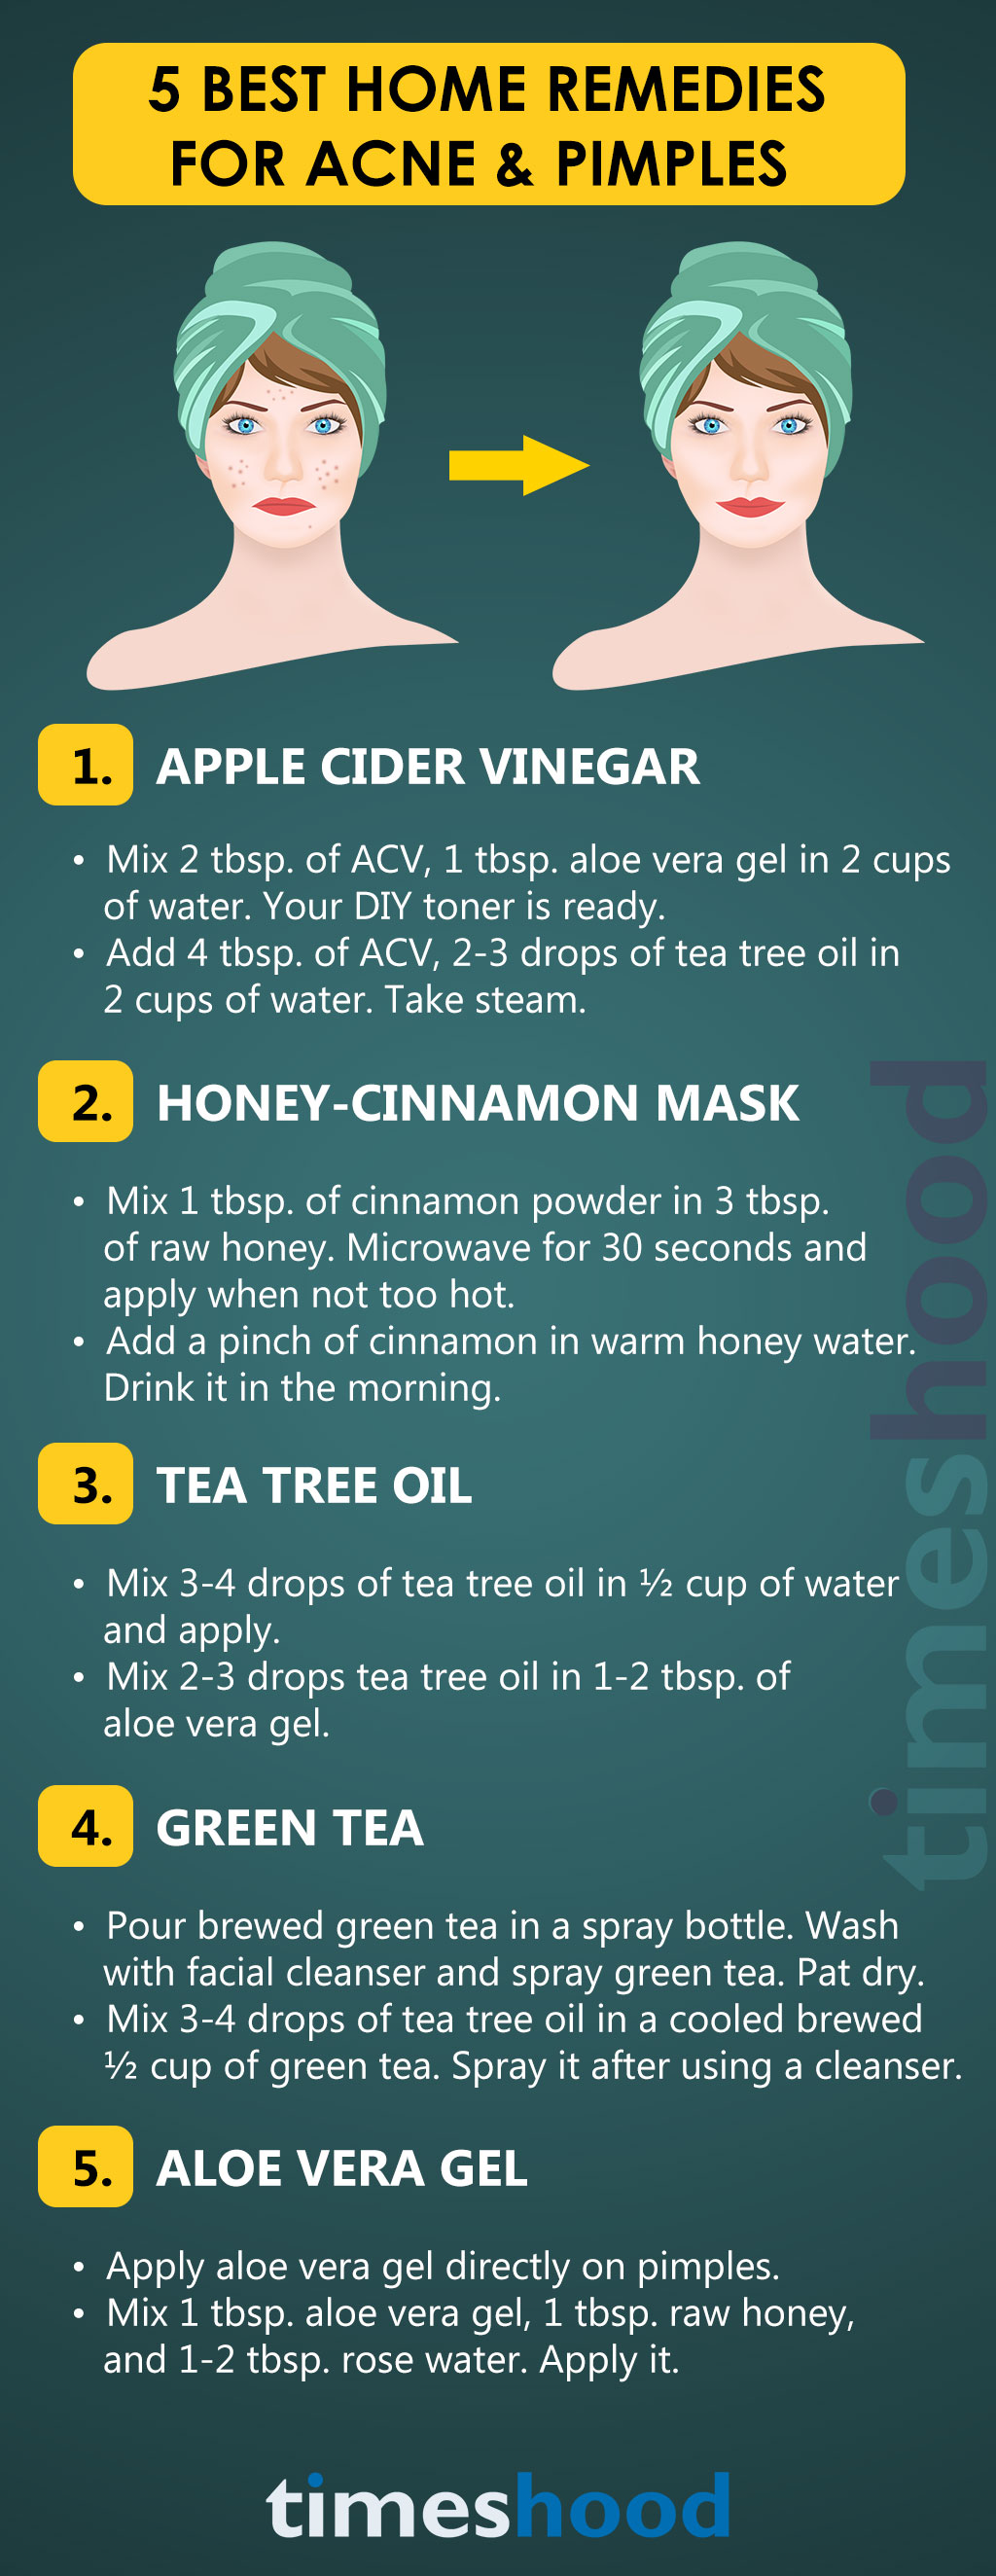 Trying to get rid of acne at home? Use these effective home remedies for acne and pimples. Best ways to get rid of pimples at home. Anti-acne remedies. 